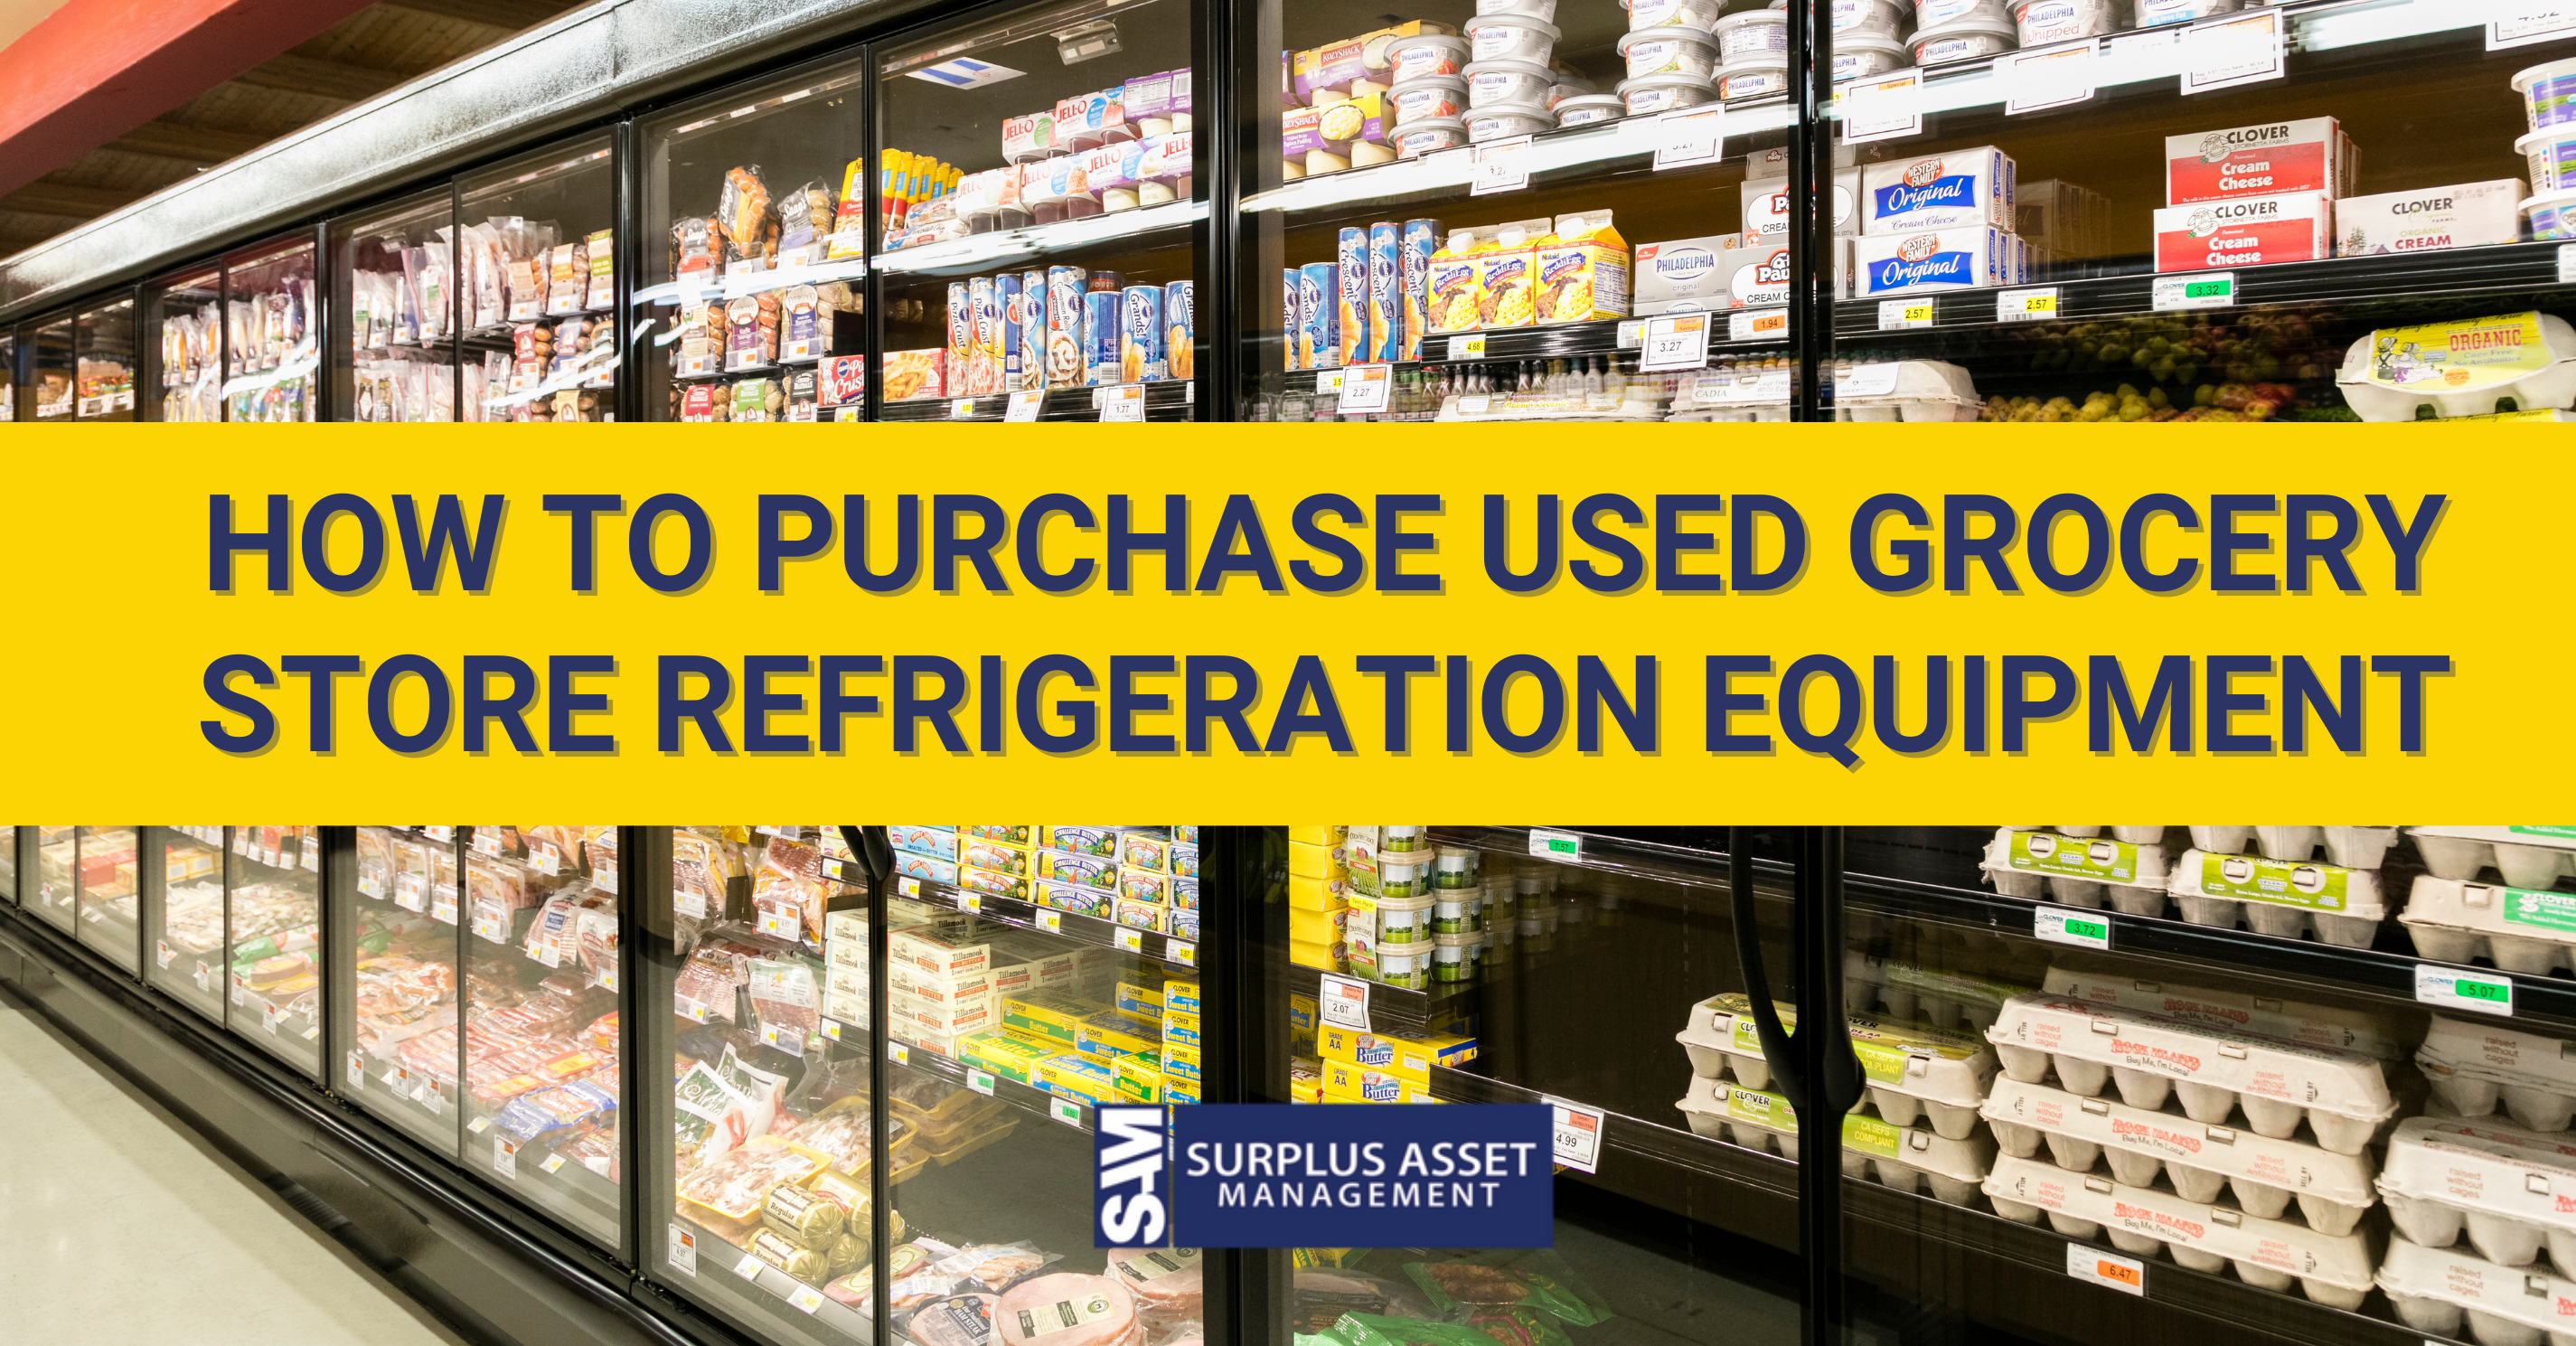 How To Purchase Used Grocery Store Refrigeration Equipment